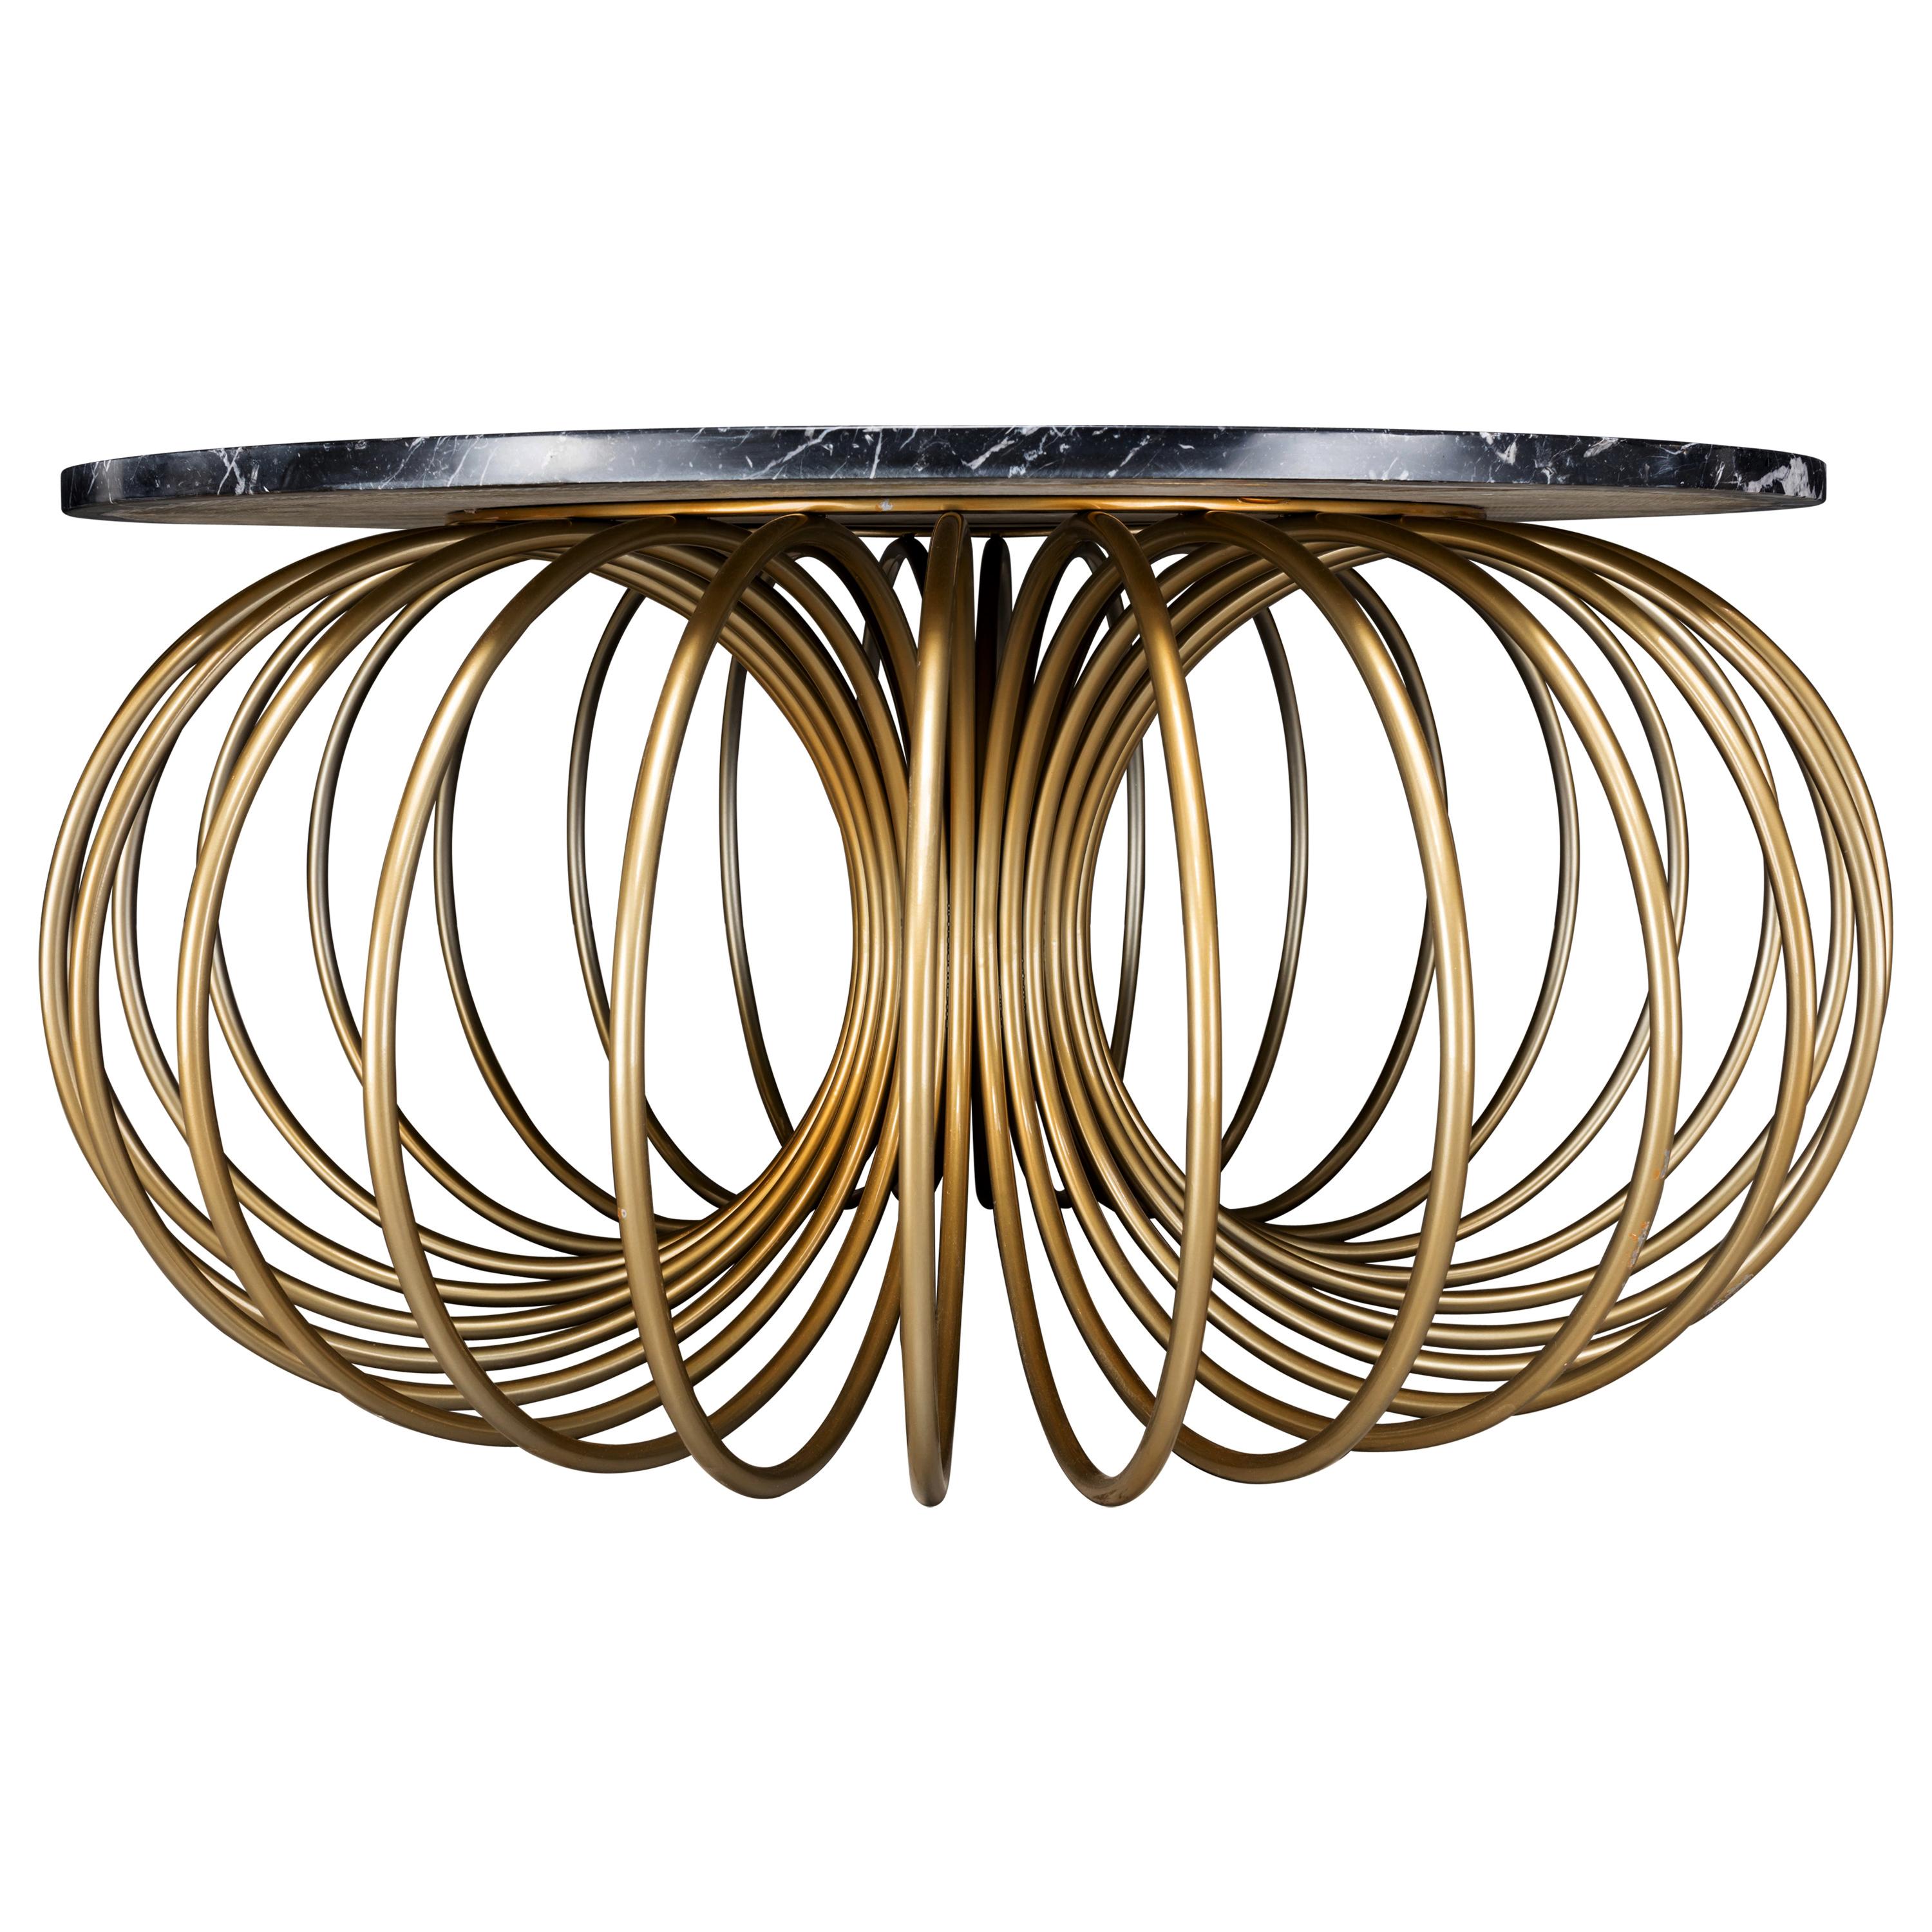 SLINK COFFEE TABLE - Nero Marquina Marble and Gold Powder Coated Metal